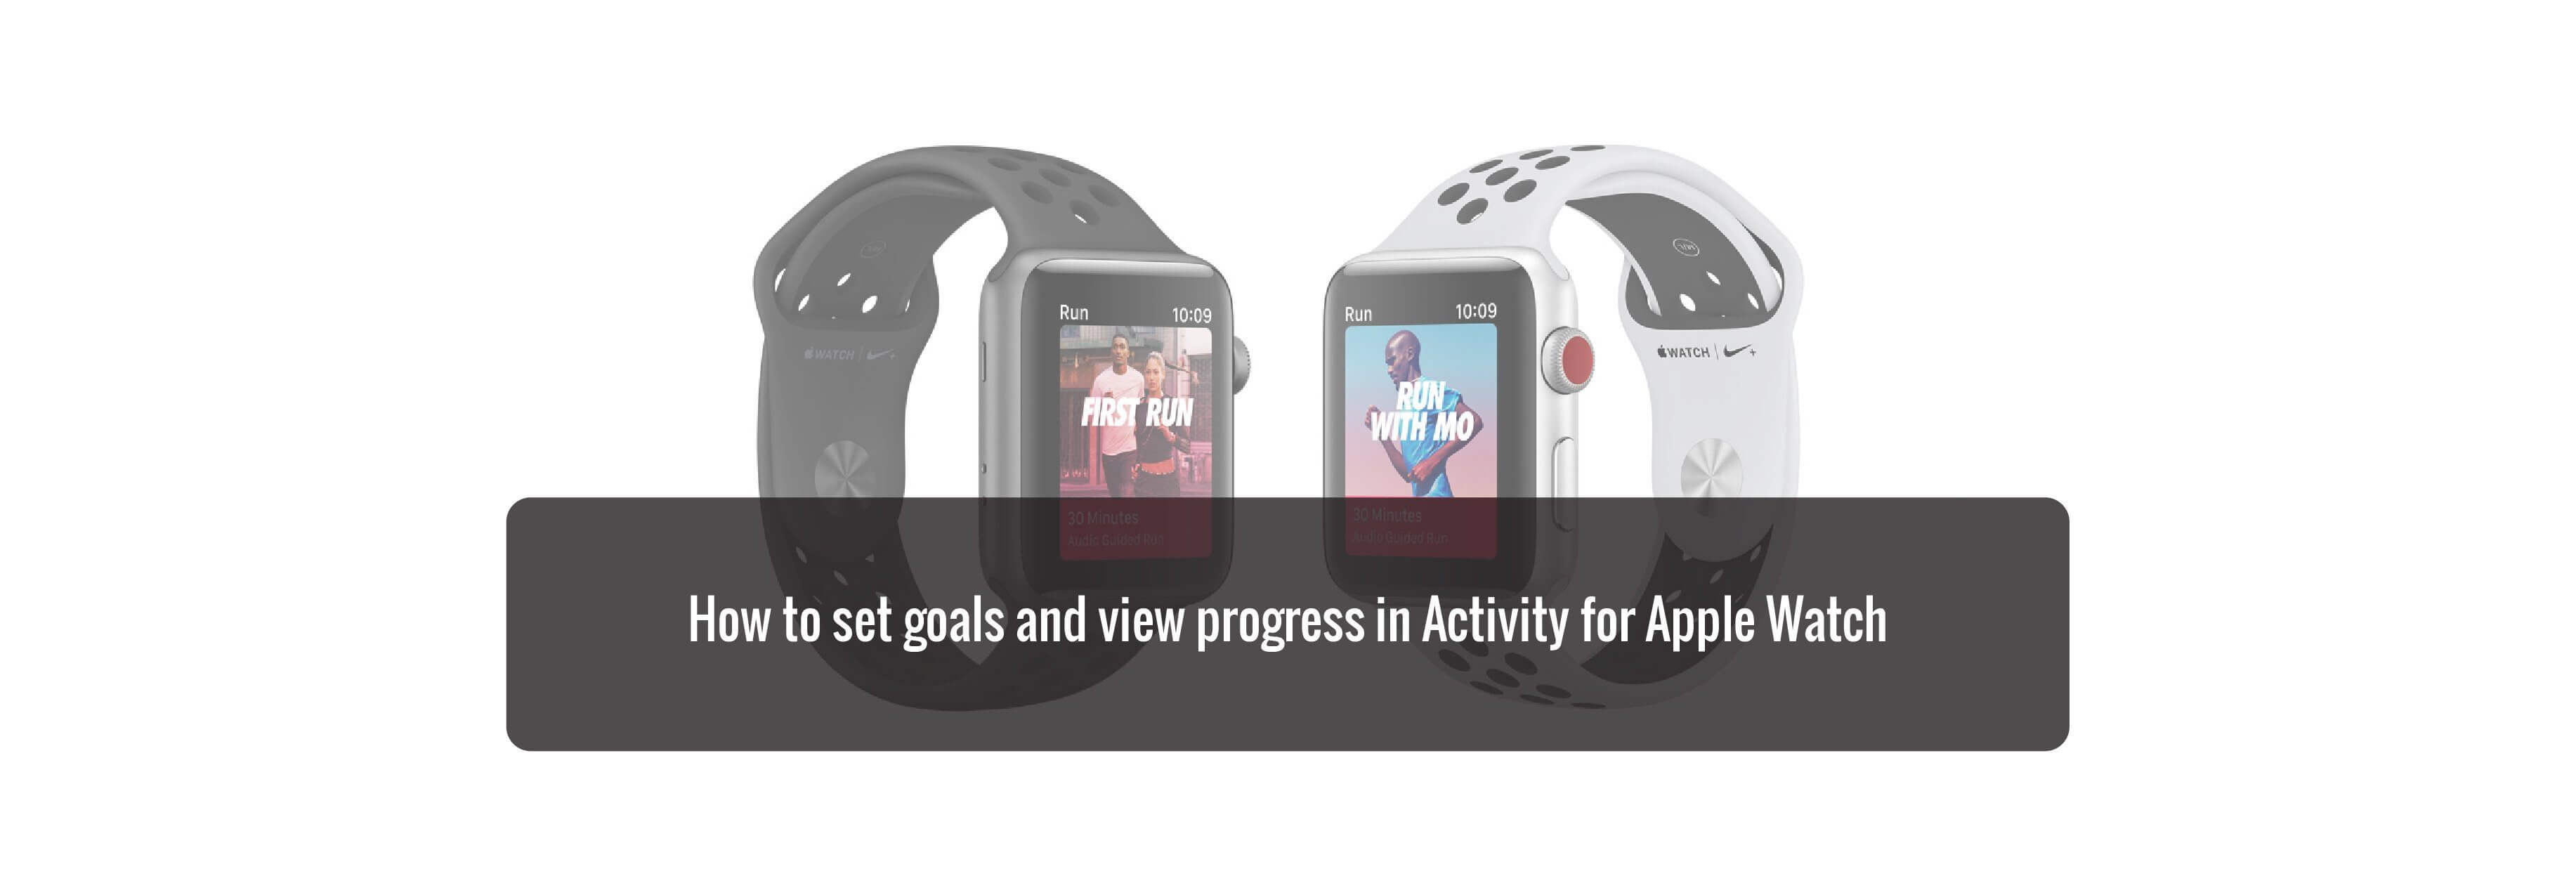 How to set goals and view progress in Activity for Apple Watch